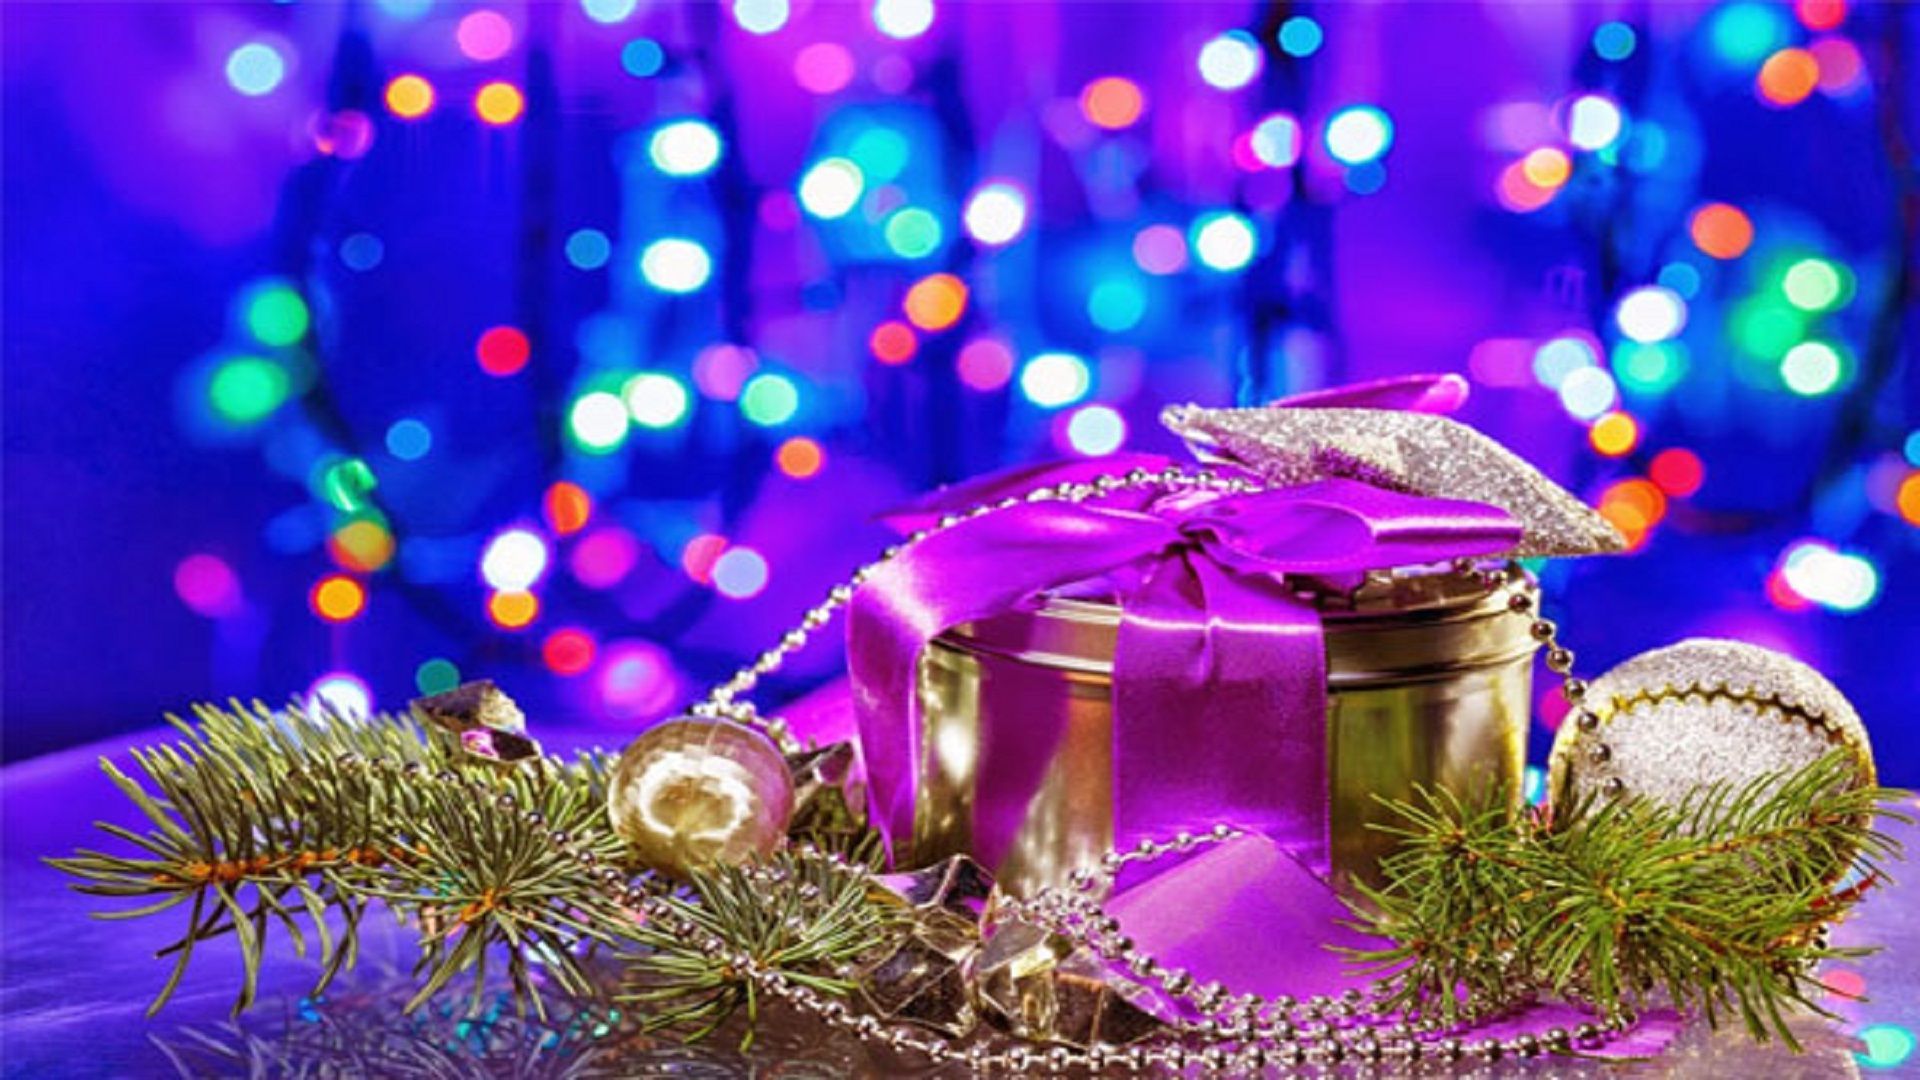 Top 10 Merry Christmas free hd wallpapers for desktop